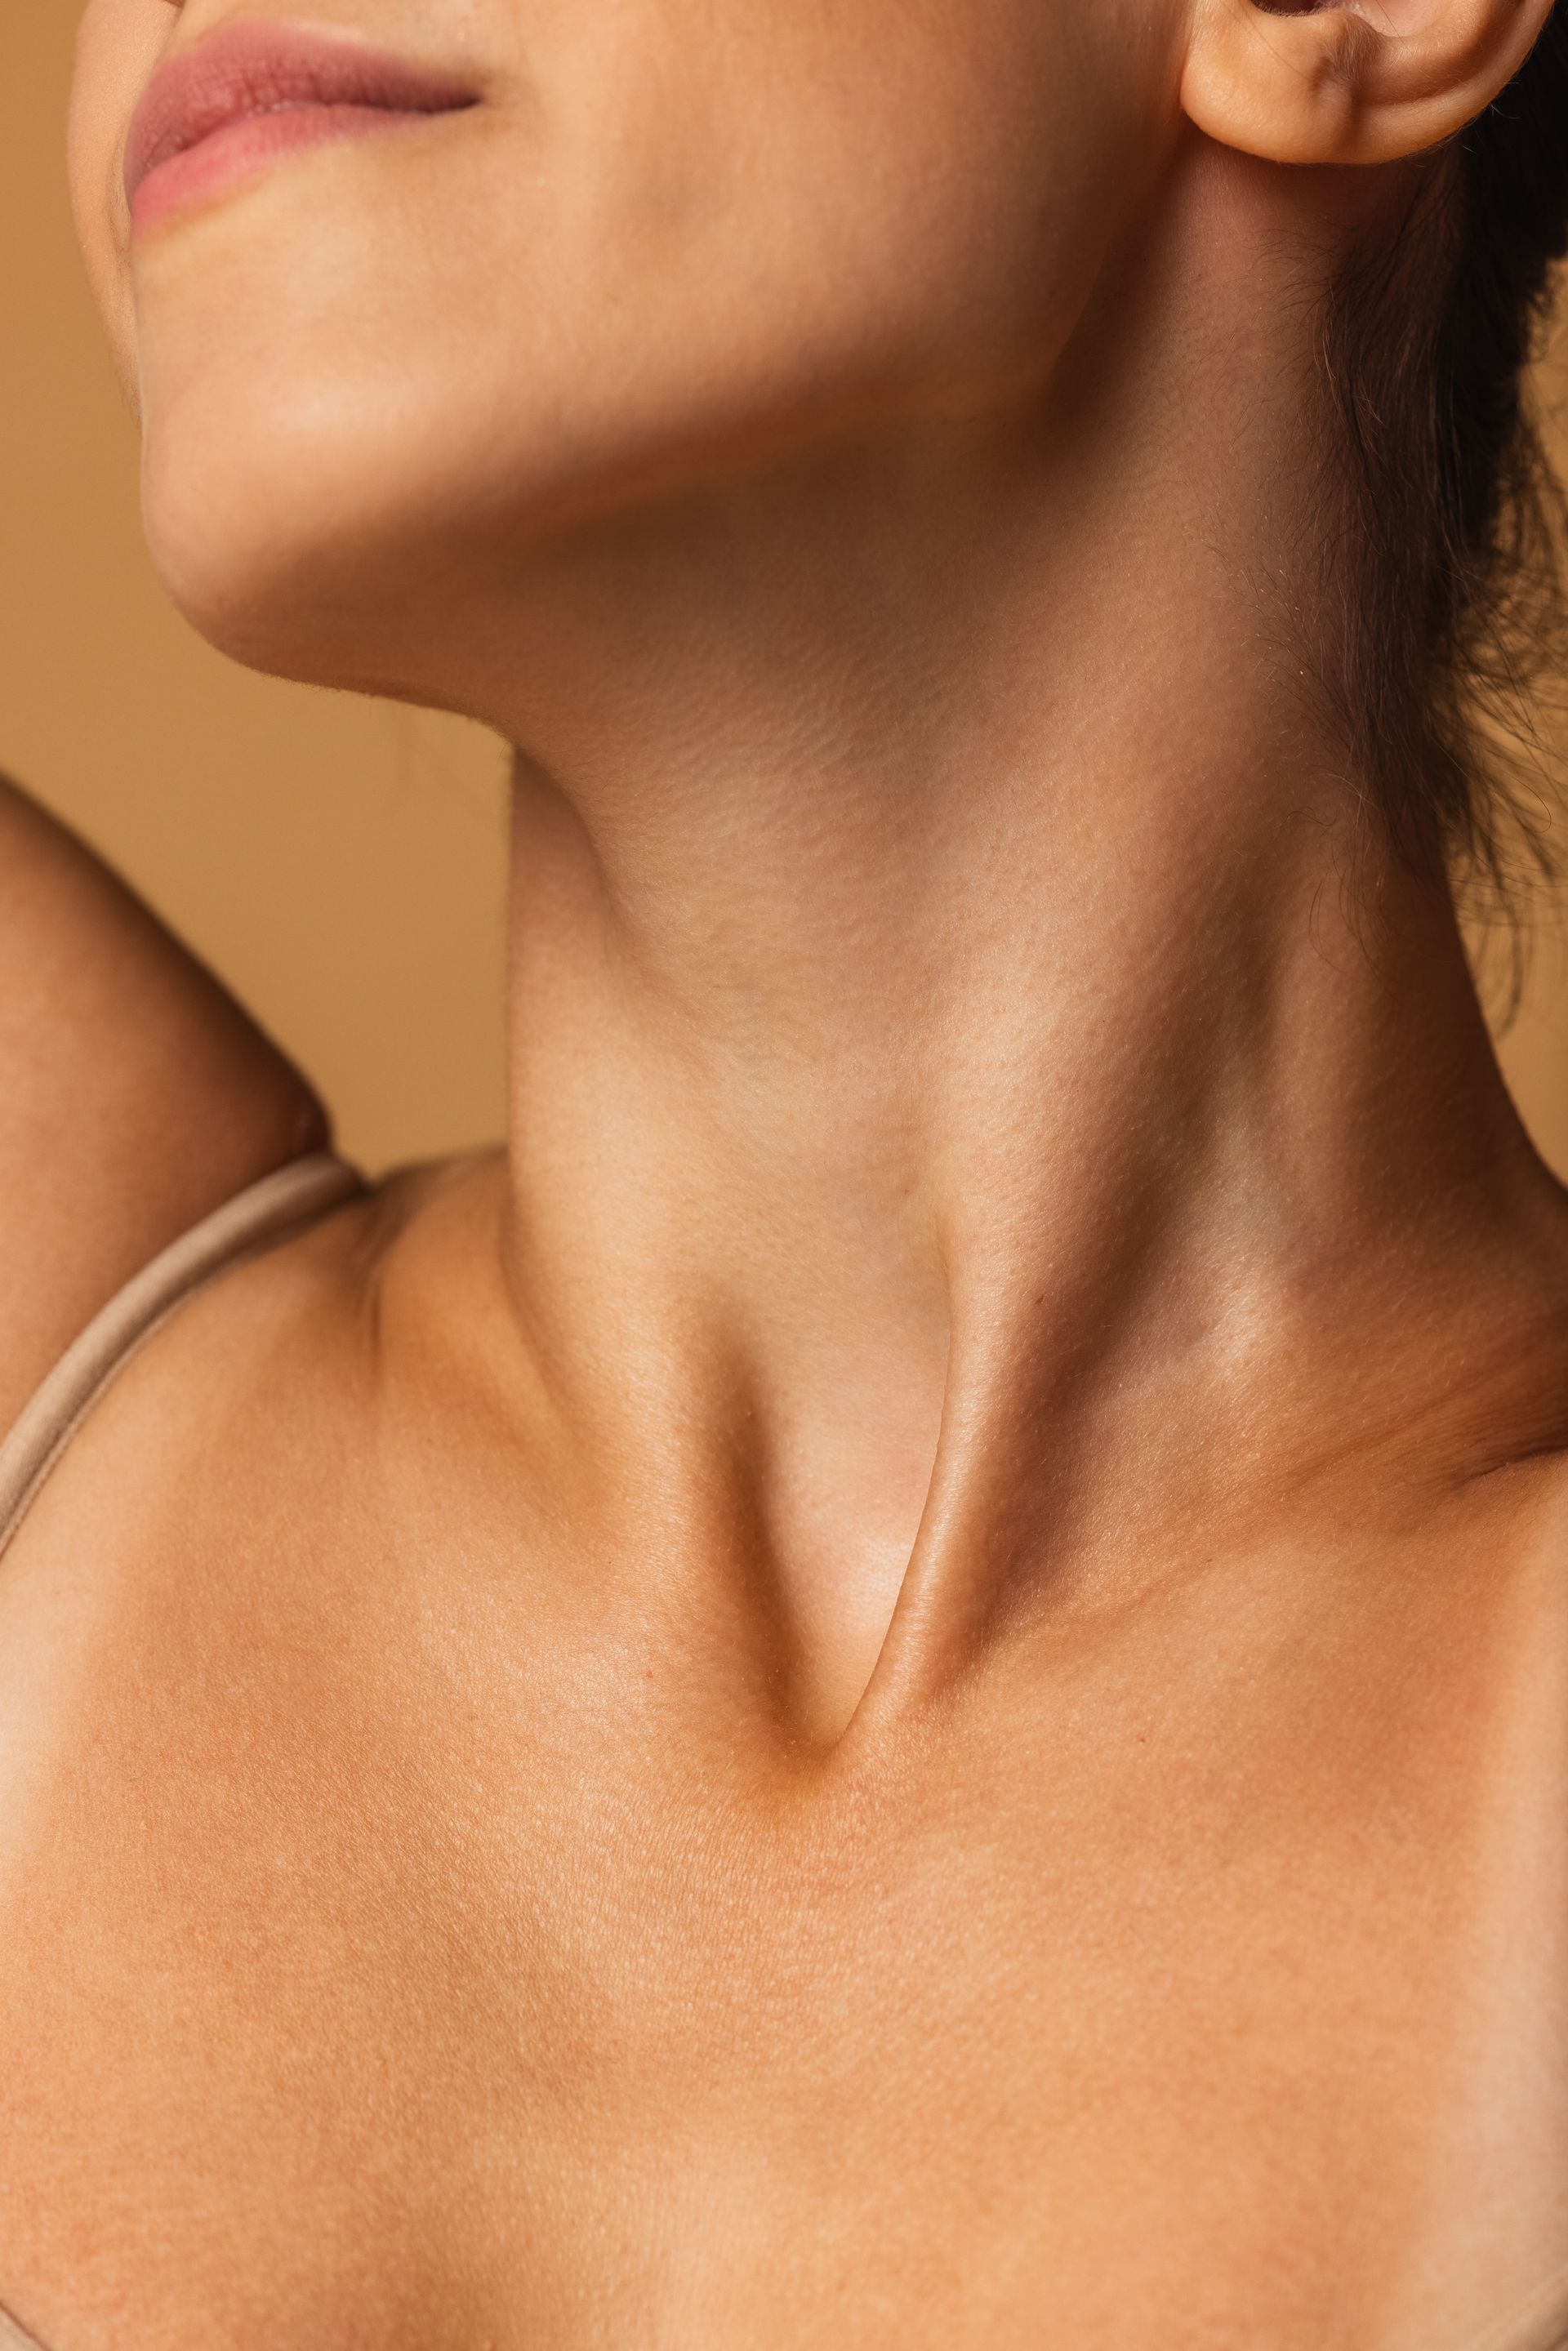 a close up of a woman 's neck and chest .